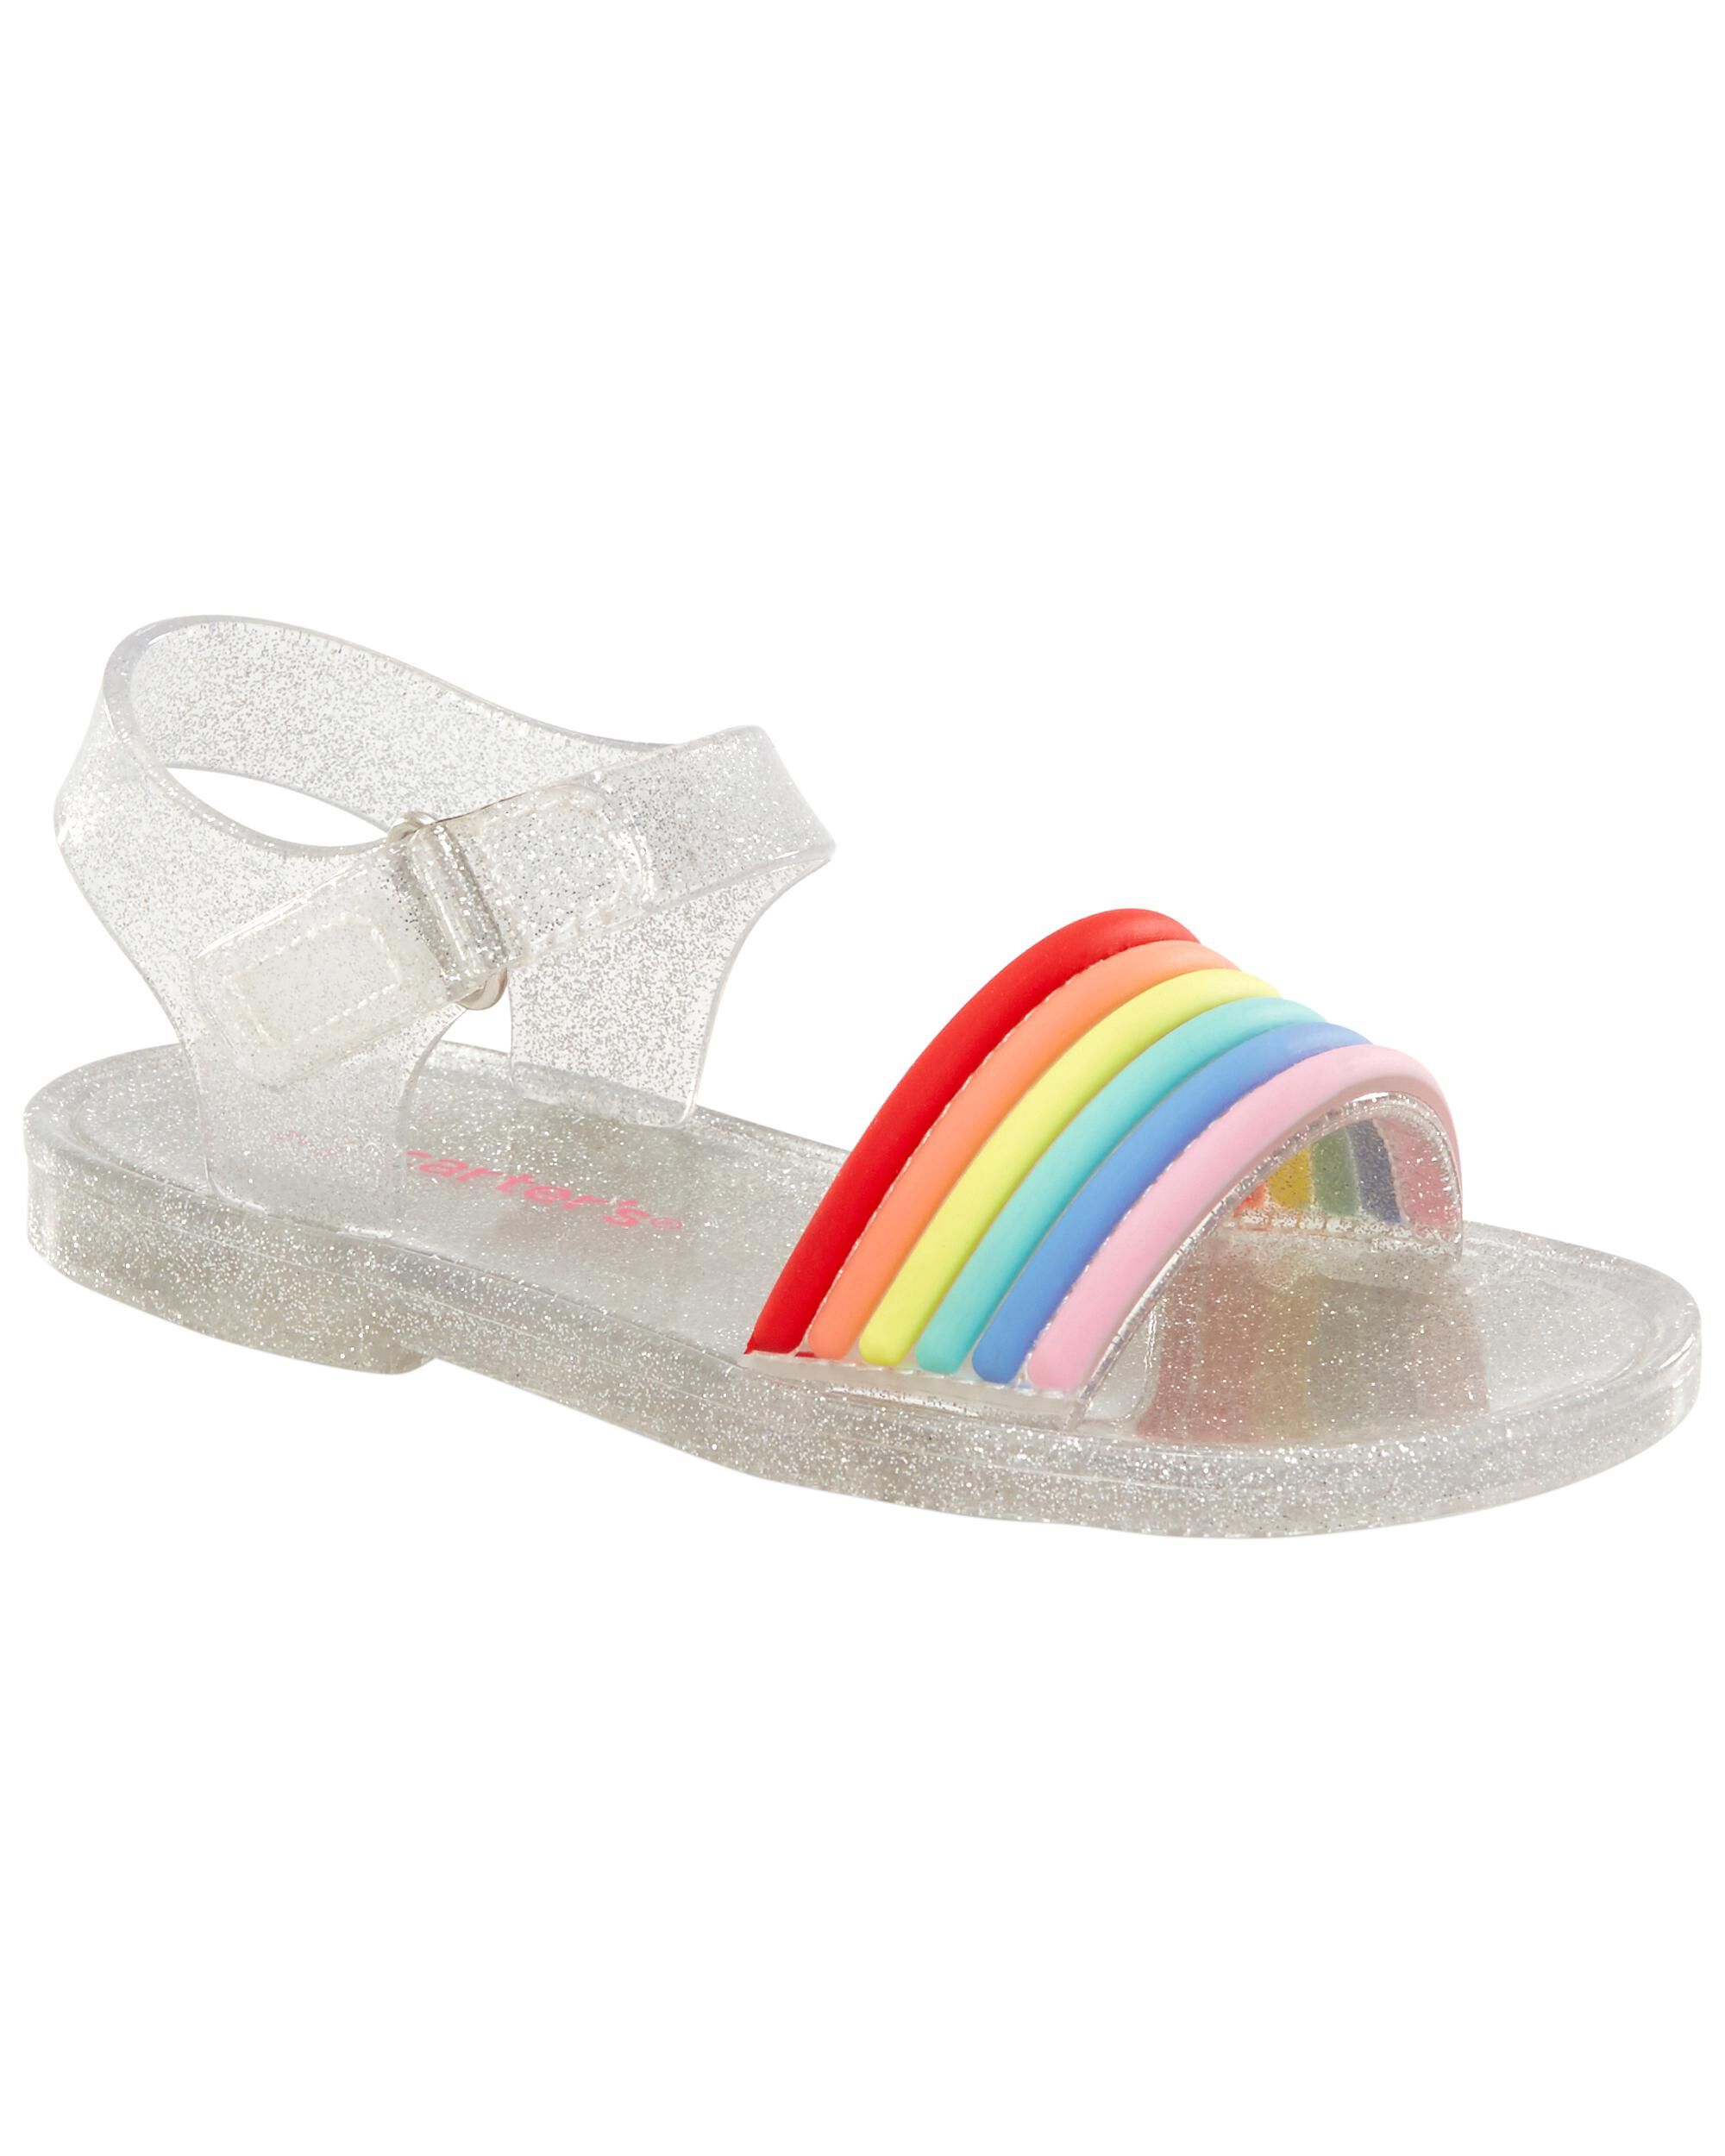 Carters Jelly Sandals